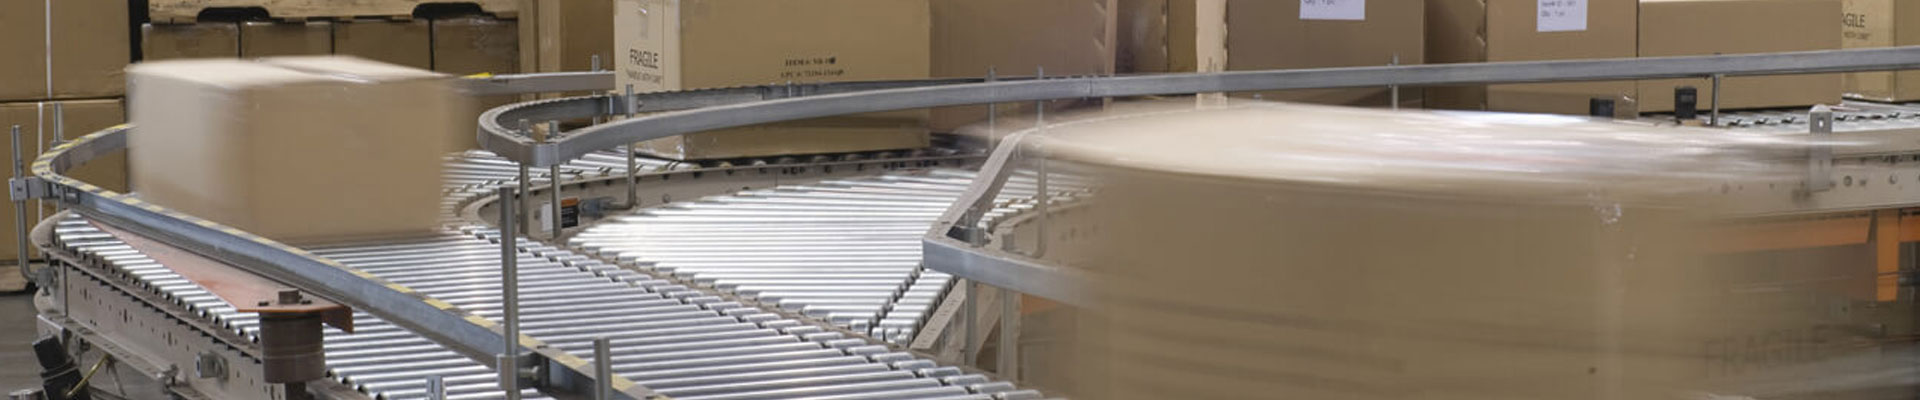 Conveyors and Conveying Equipment